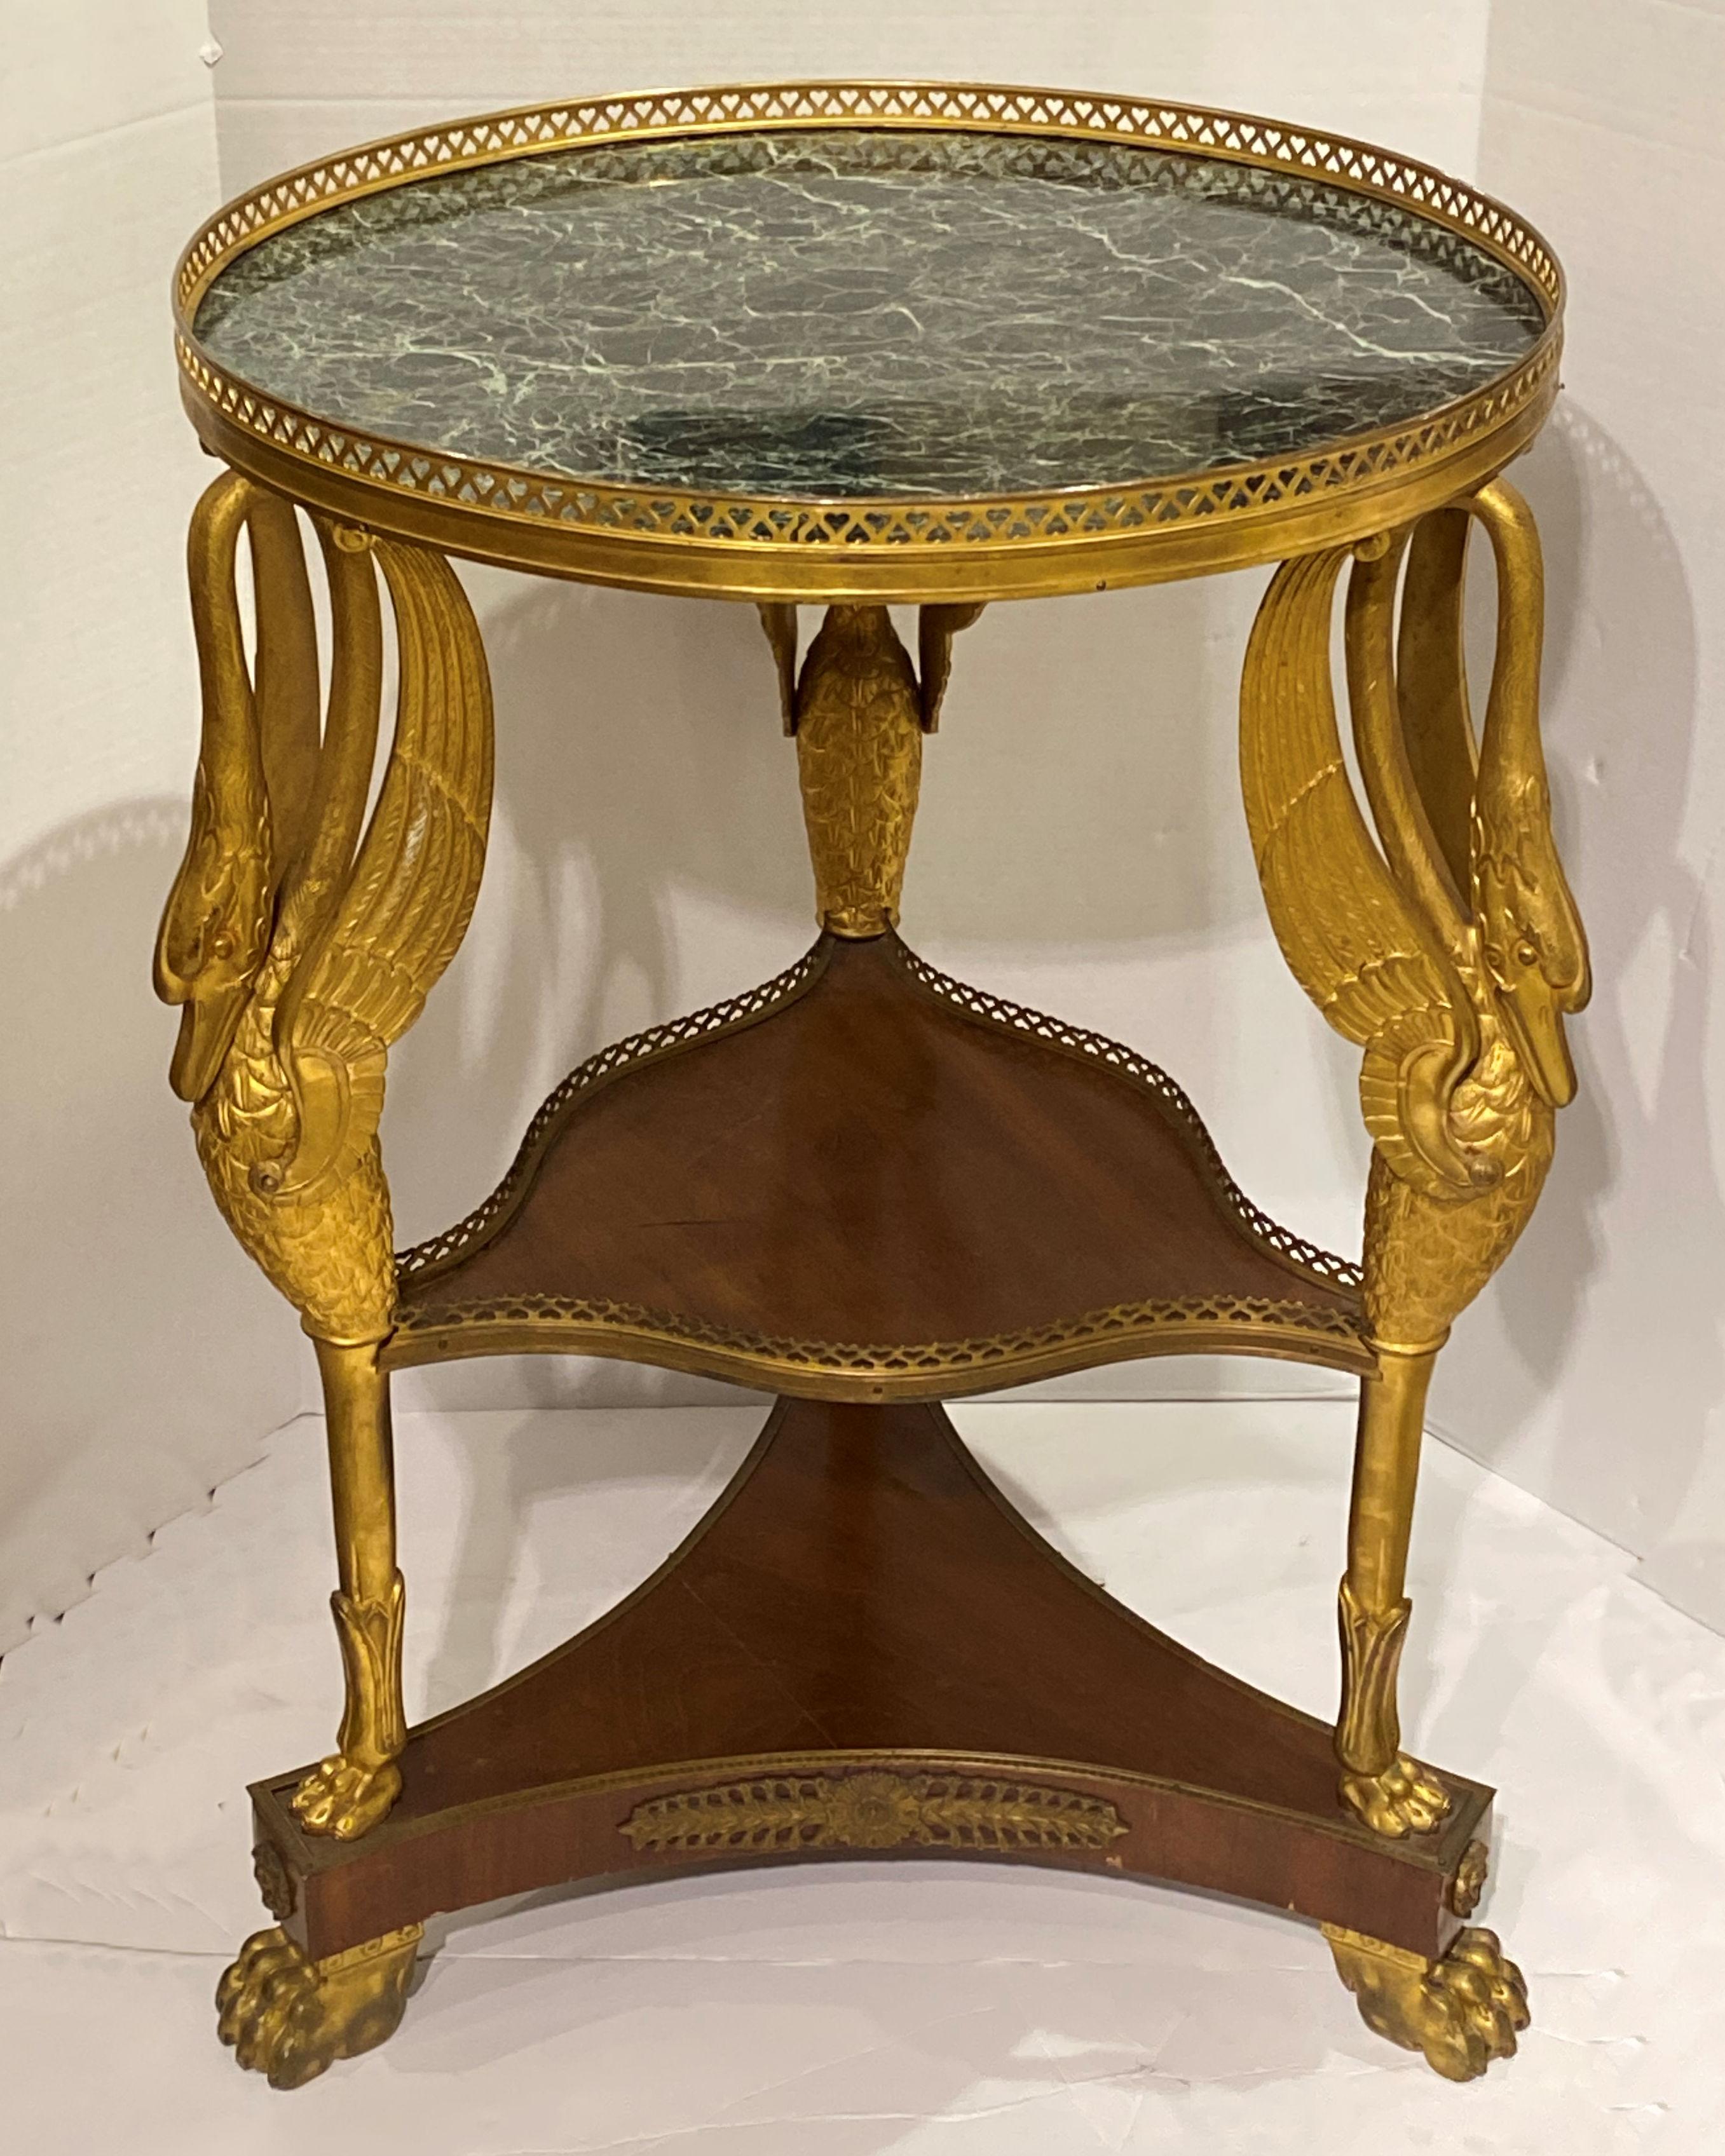 19 century French Empire Style gilt bronze and mahogany marble-top gueridon table with bronze swan legs.